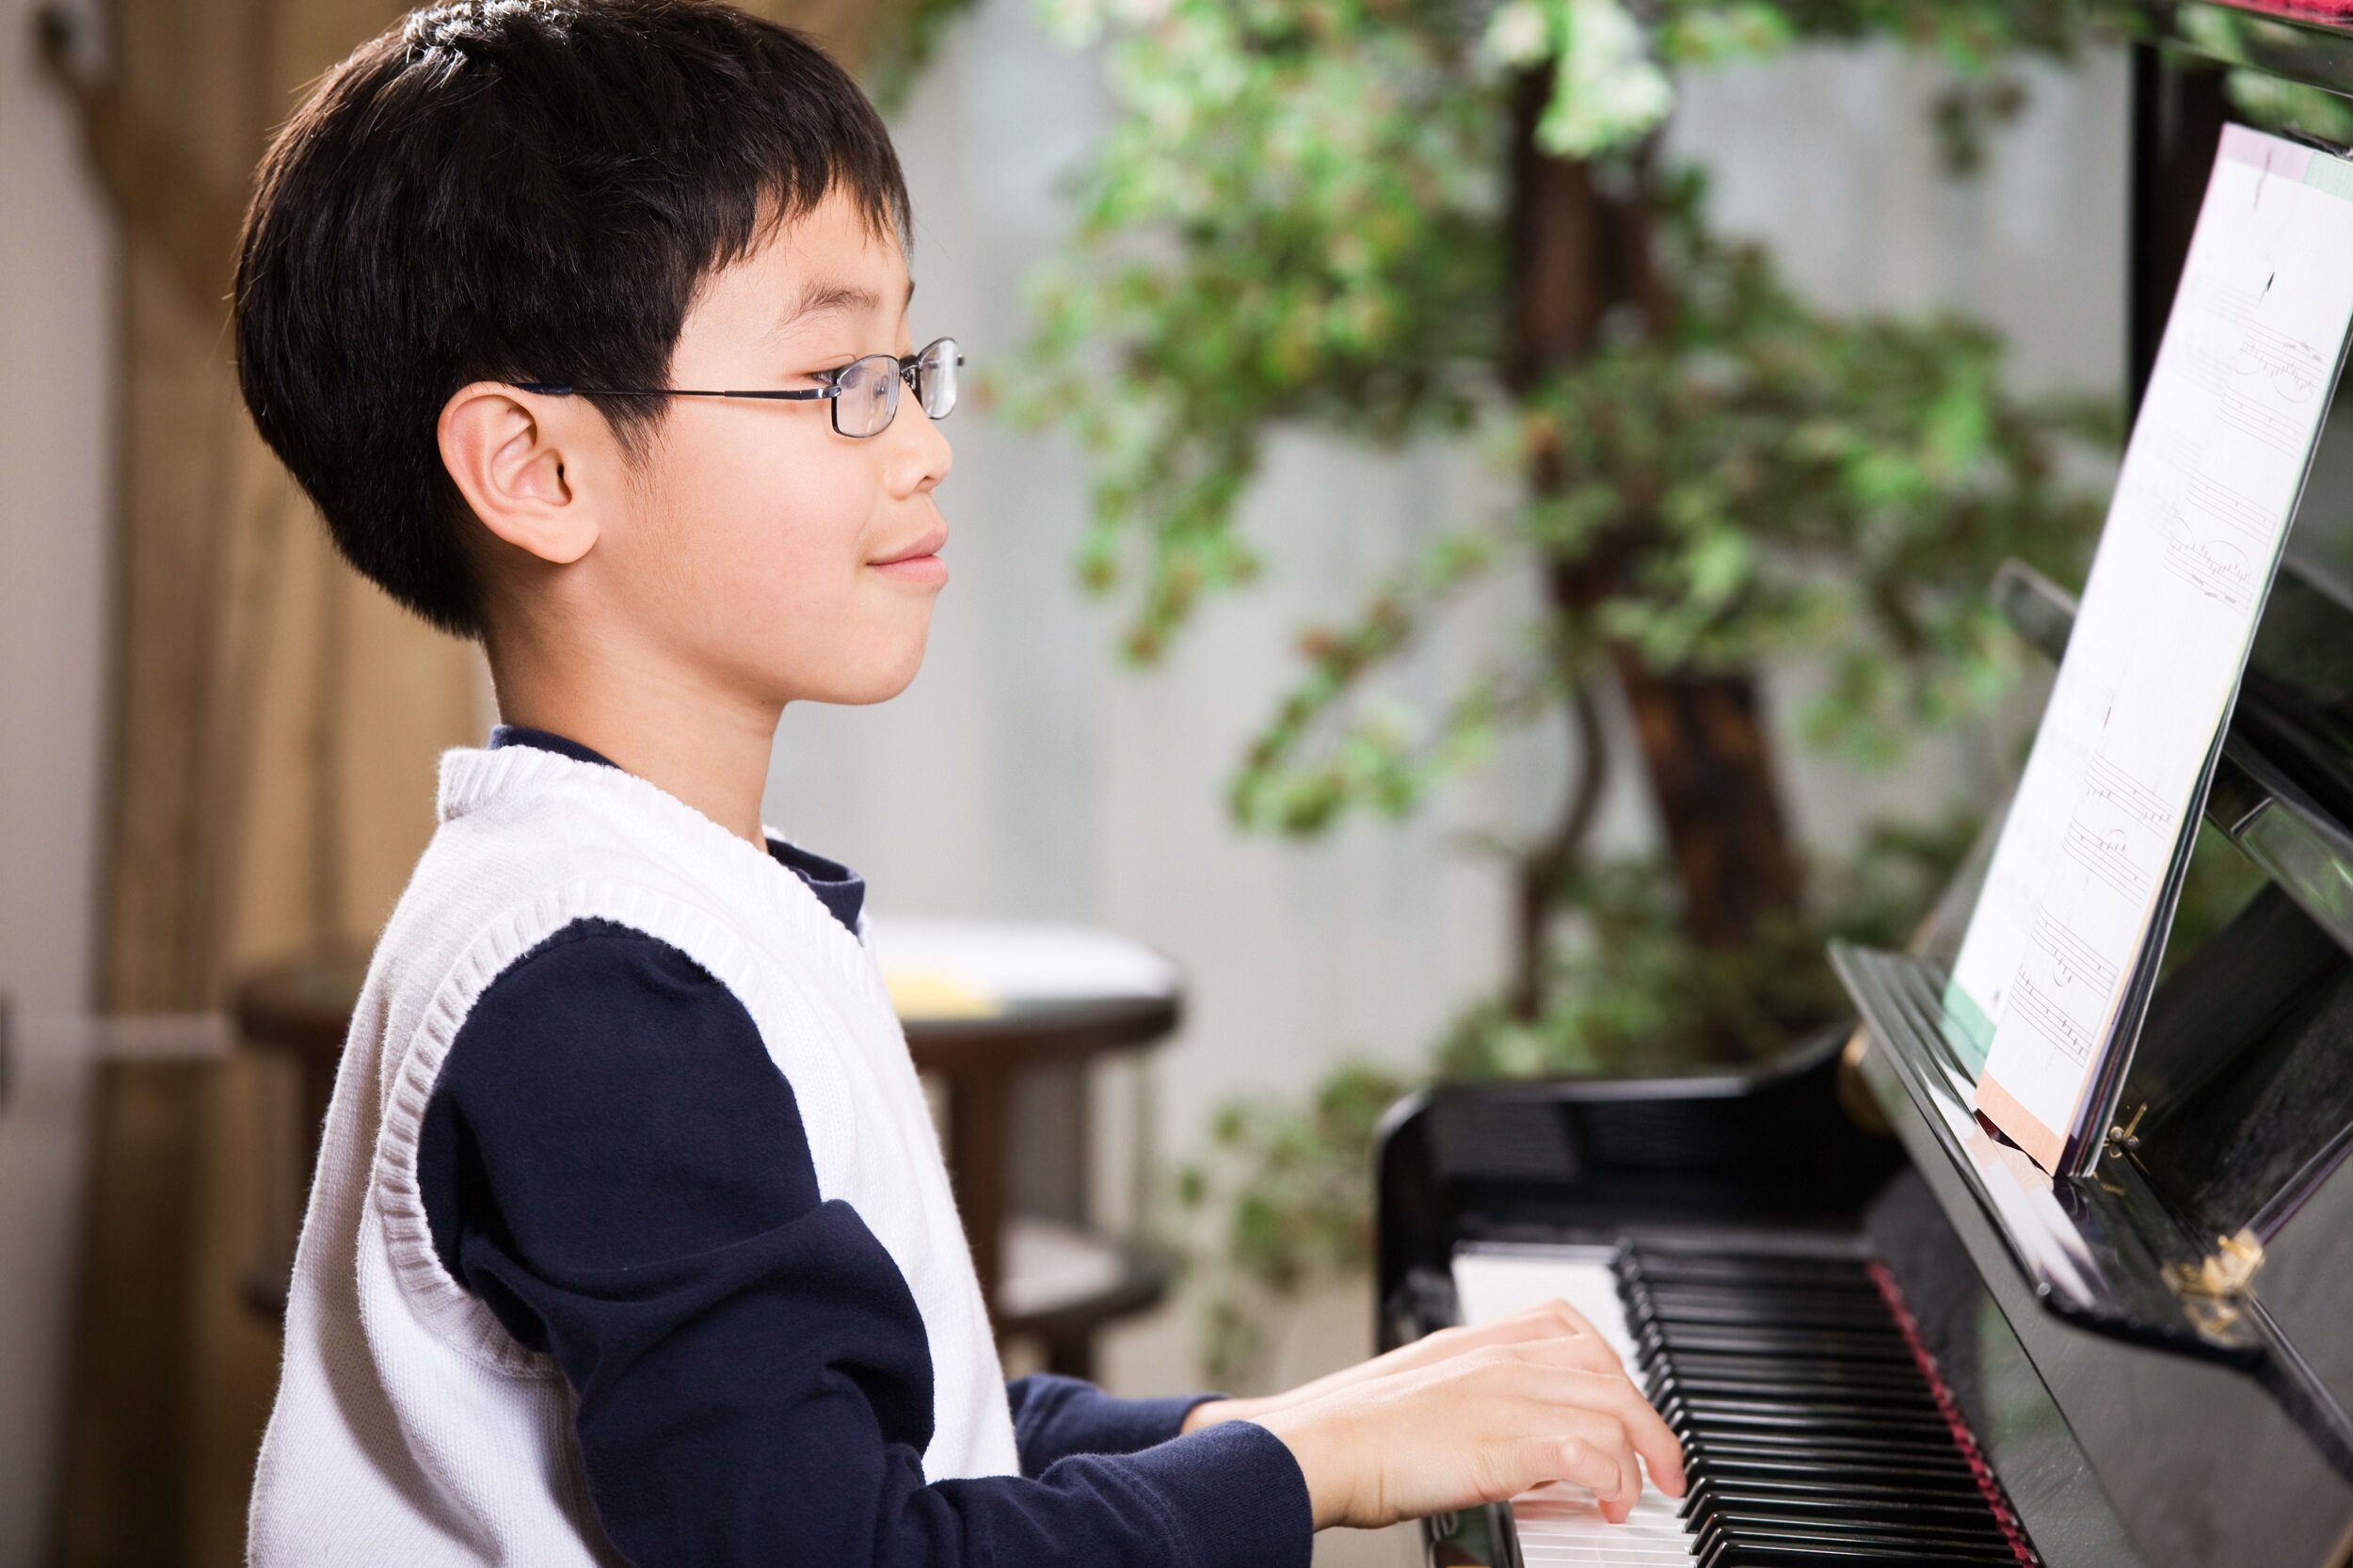 Child taking piano lessons